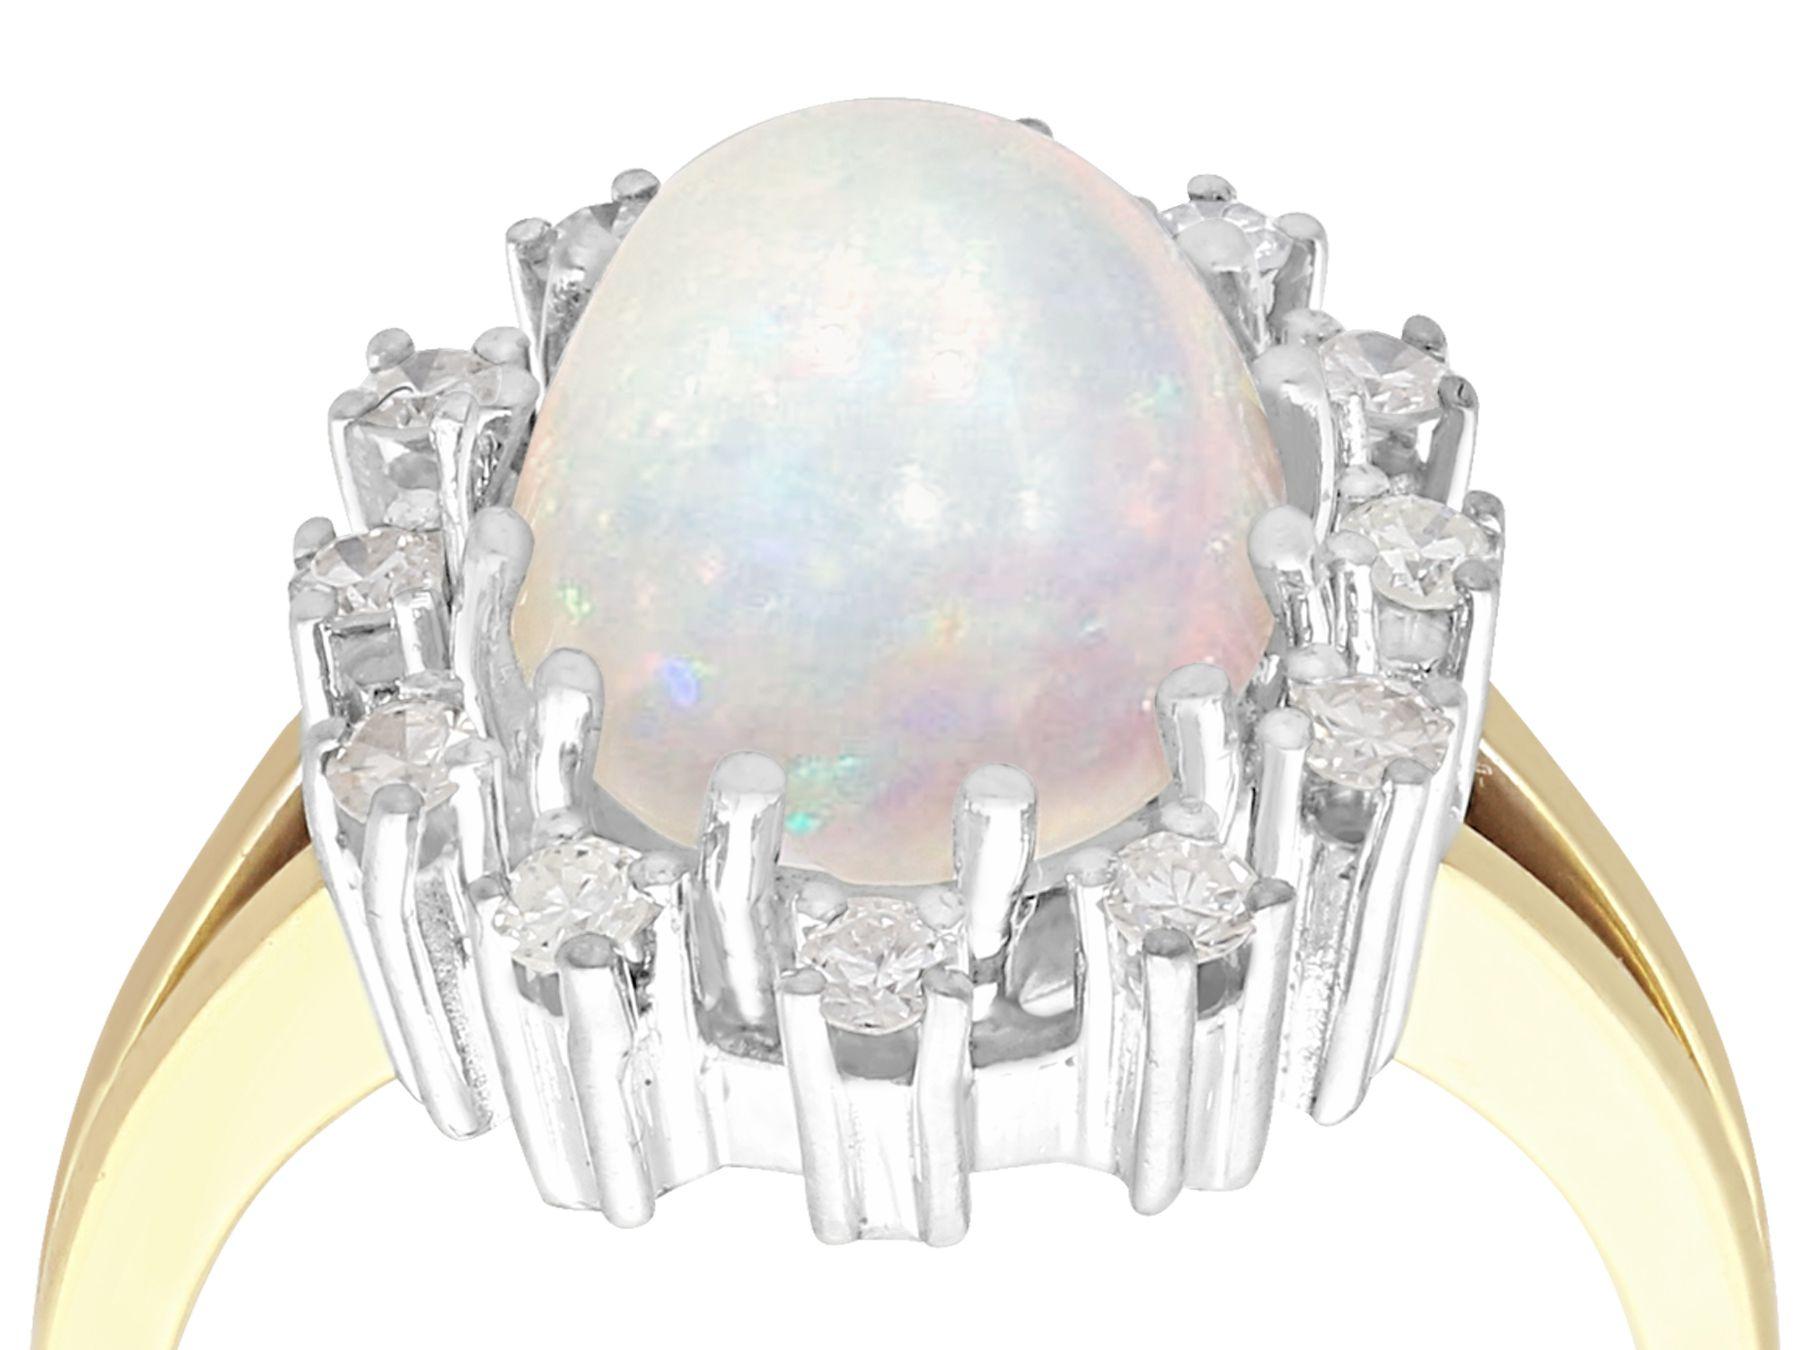 A fine and impressive vintage 3.01 carat opal and 0.38 carat diamond, 14 karat yellow gold and 14 karat white gold set cocktail ring; part of our diverse vintage jewelry collections.

This fine and impressive cabochon cut opal and diamond cluster